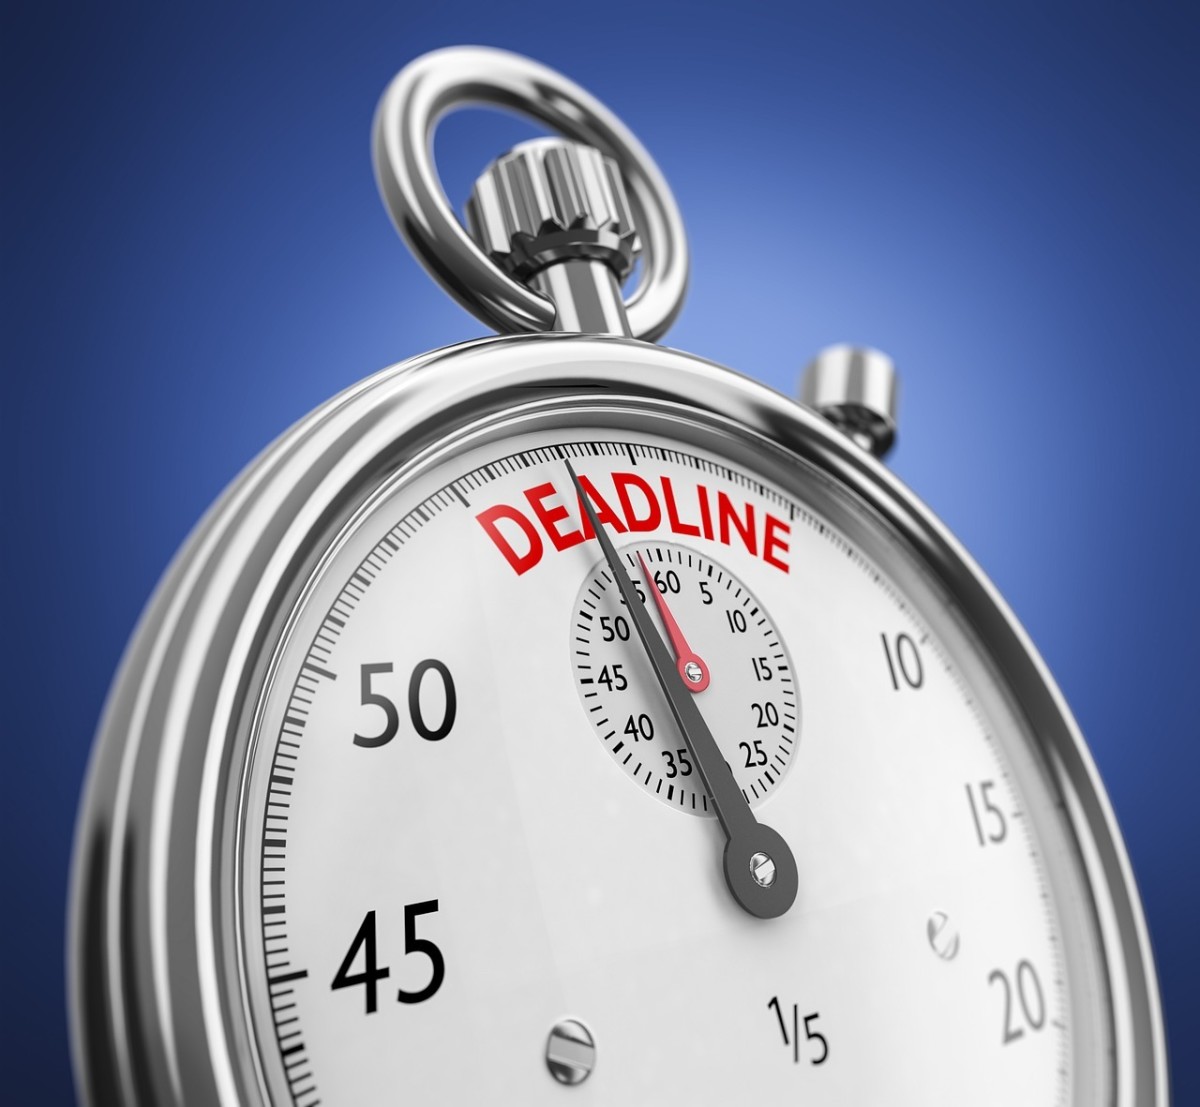 If you make your goal measurable and give yourself a deadline, you are more likely to work towards that goal.